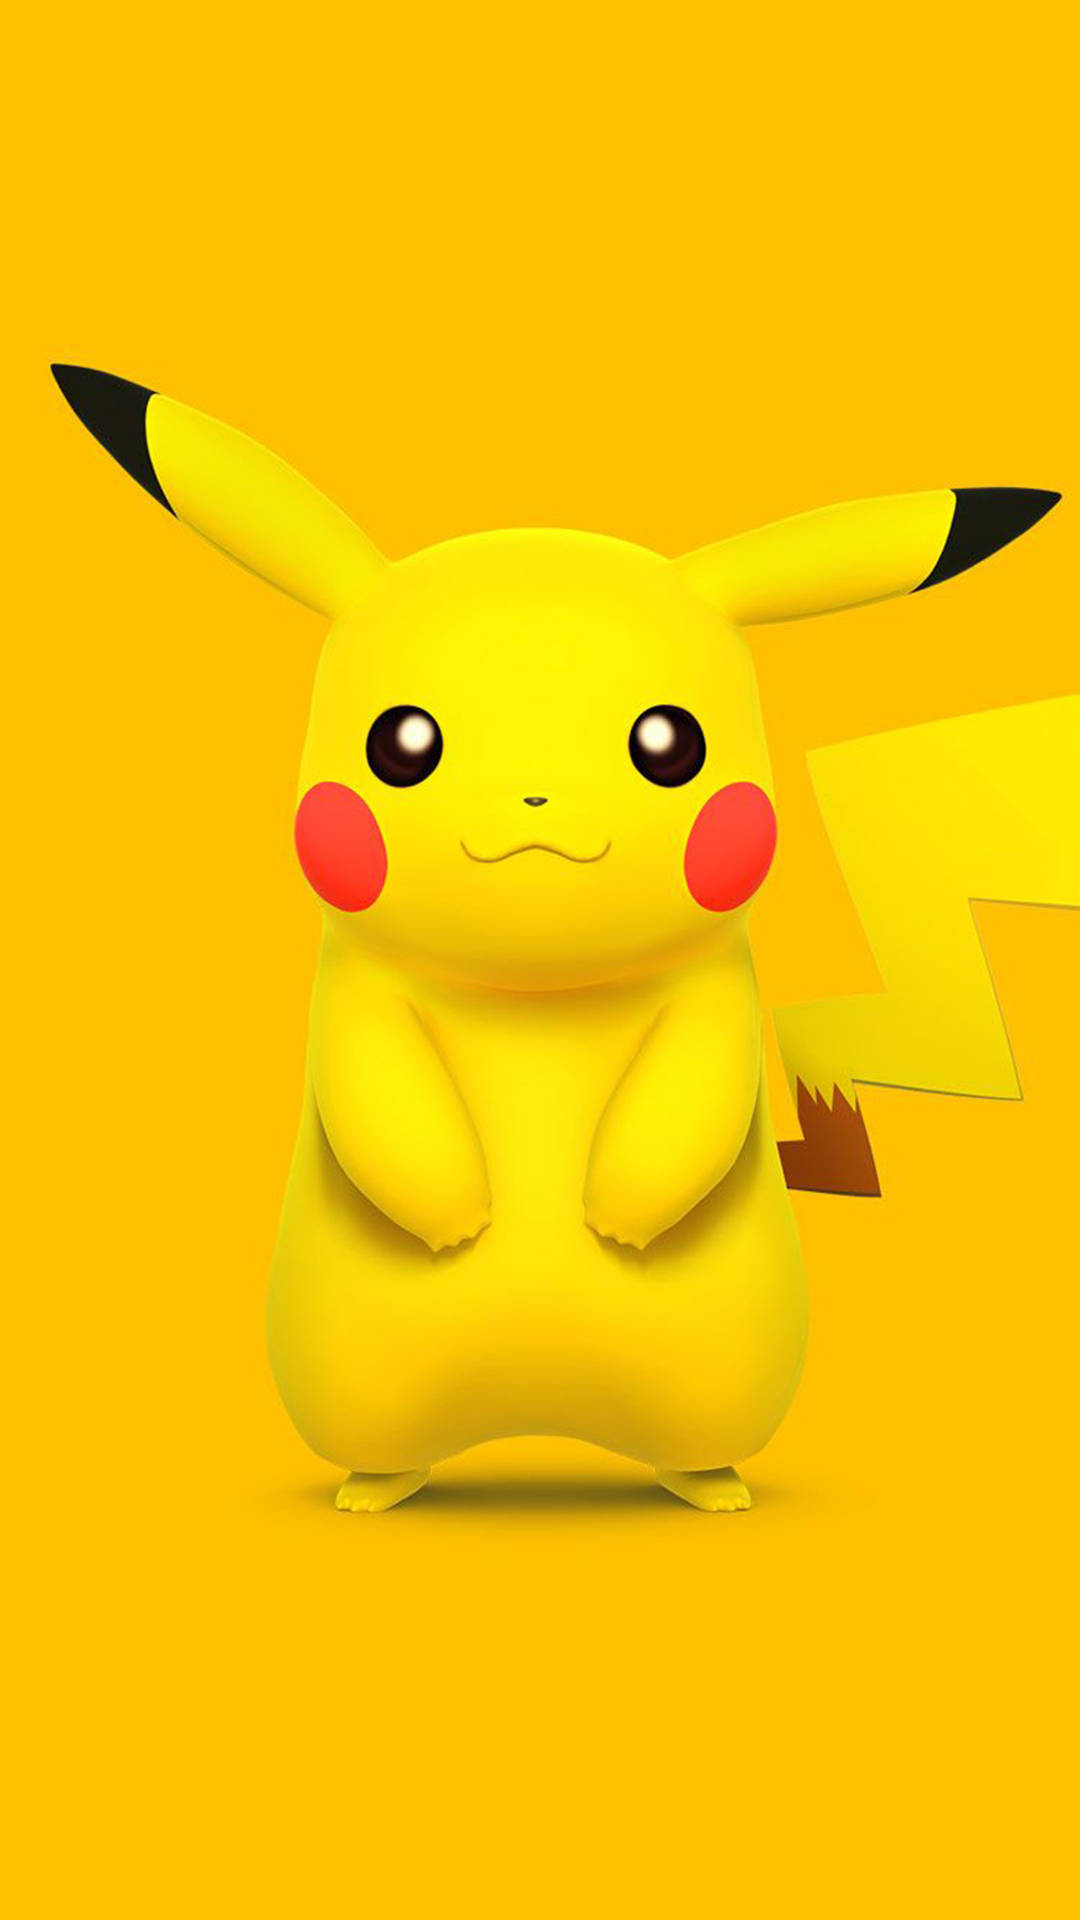 Caption: Colorful Encounter With Cute Pokemon On Iphone Wallpaper